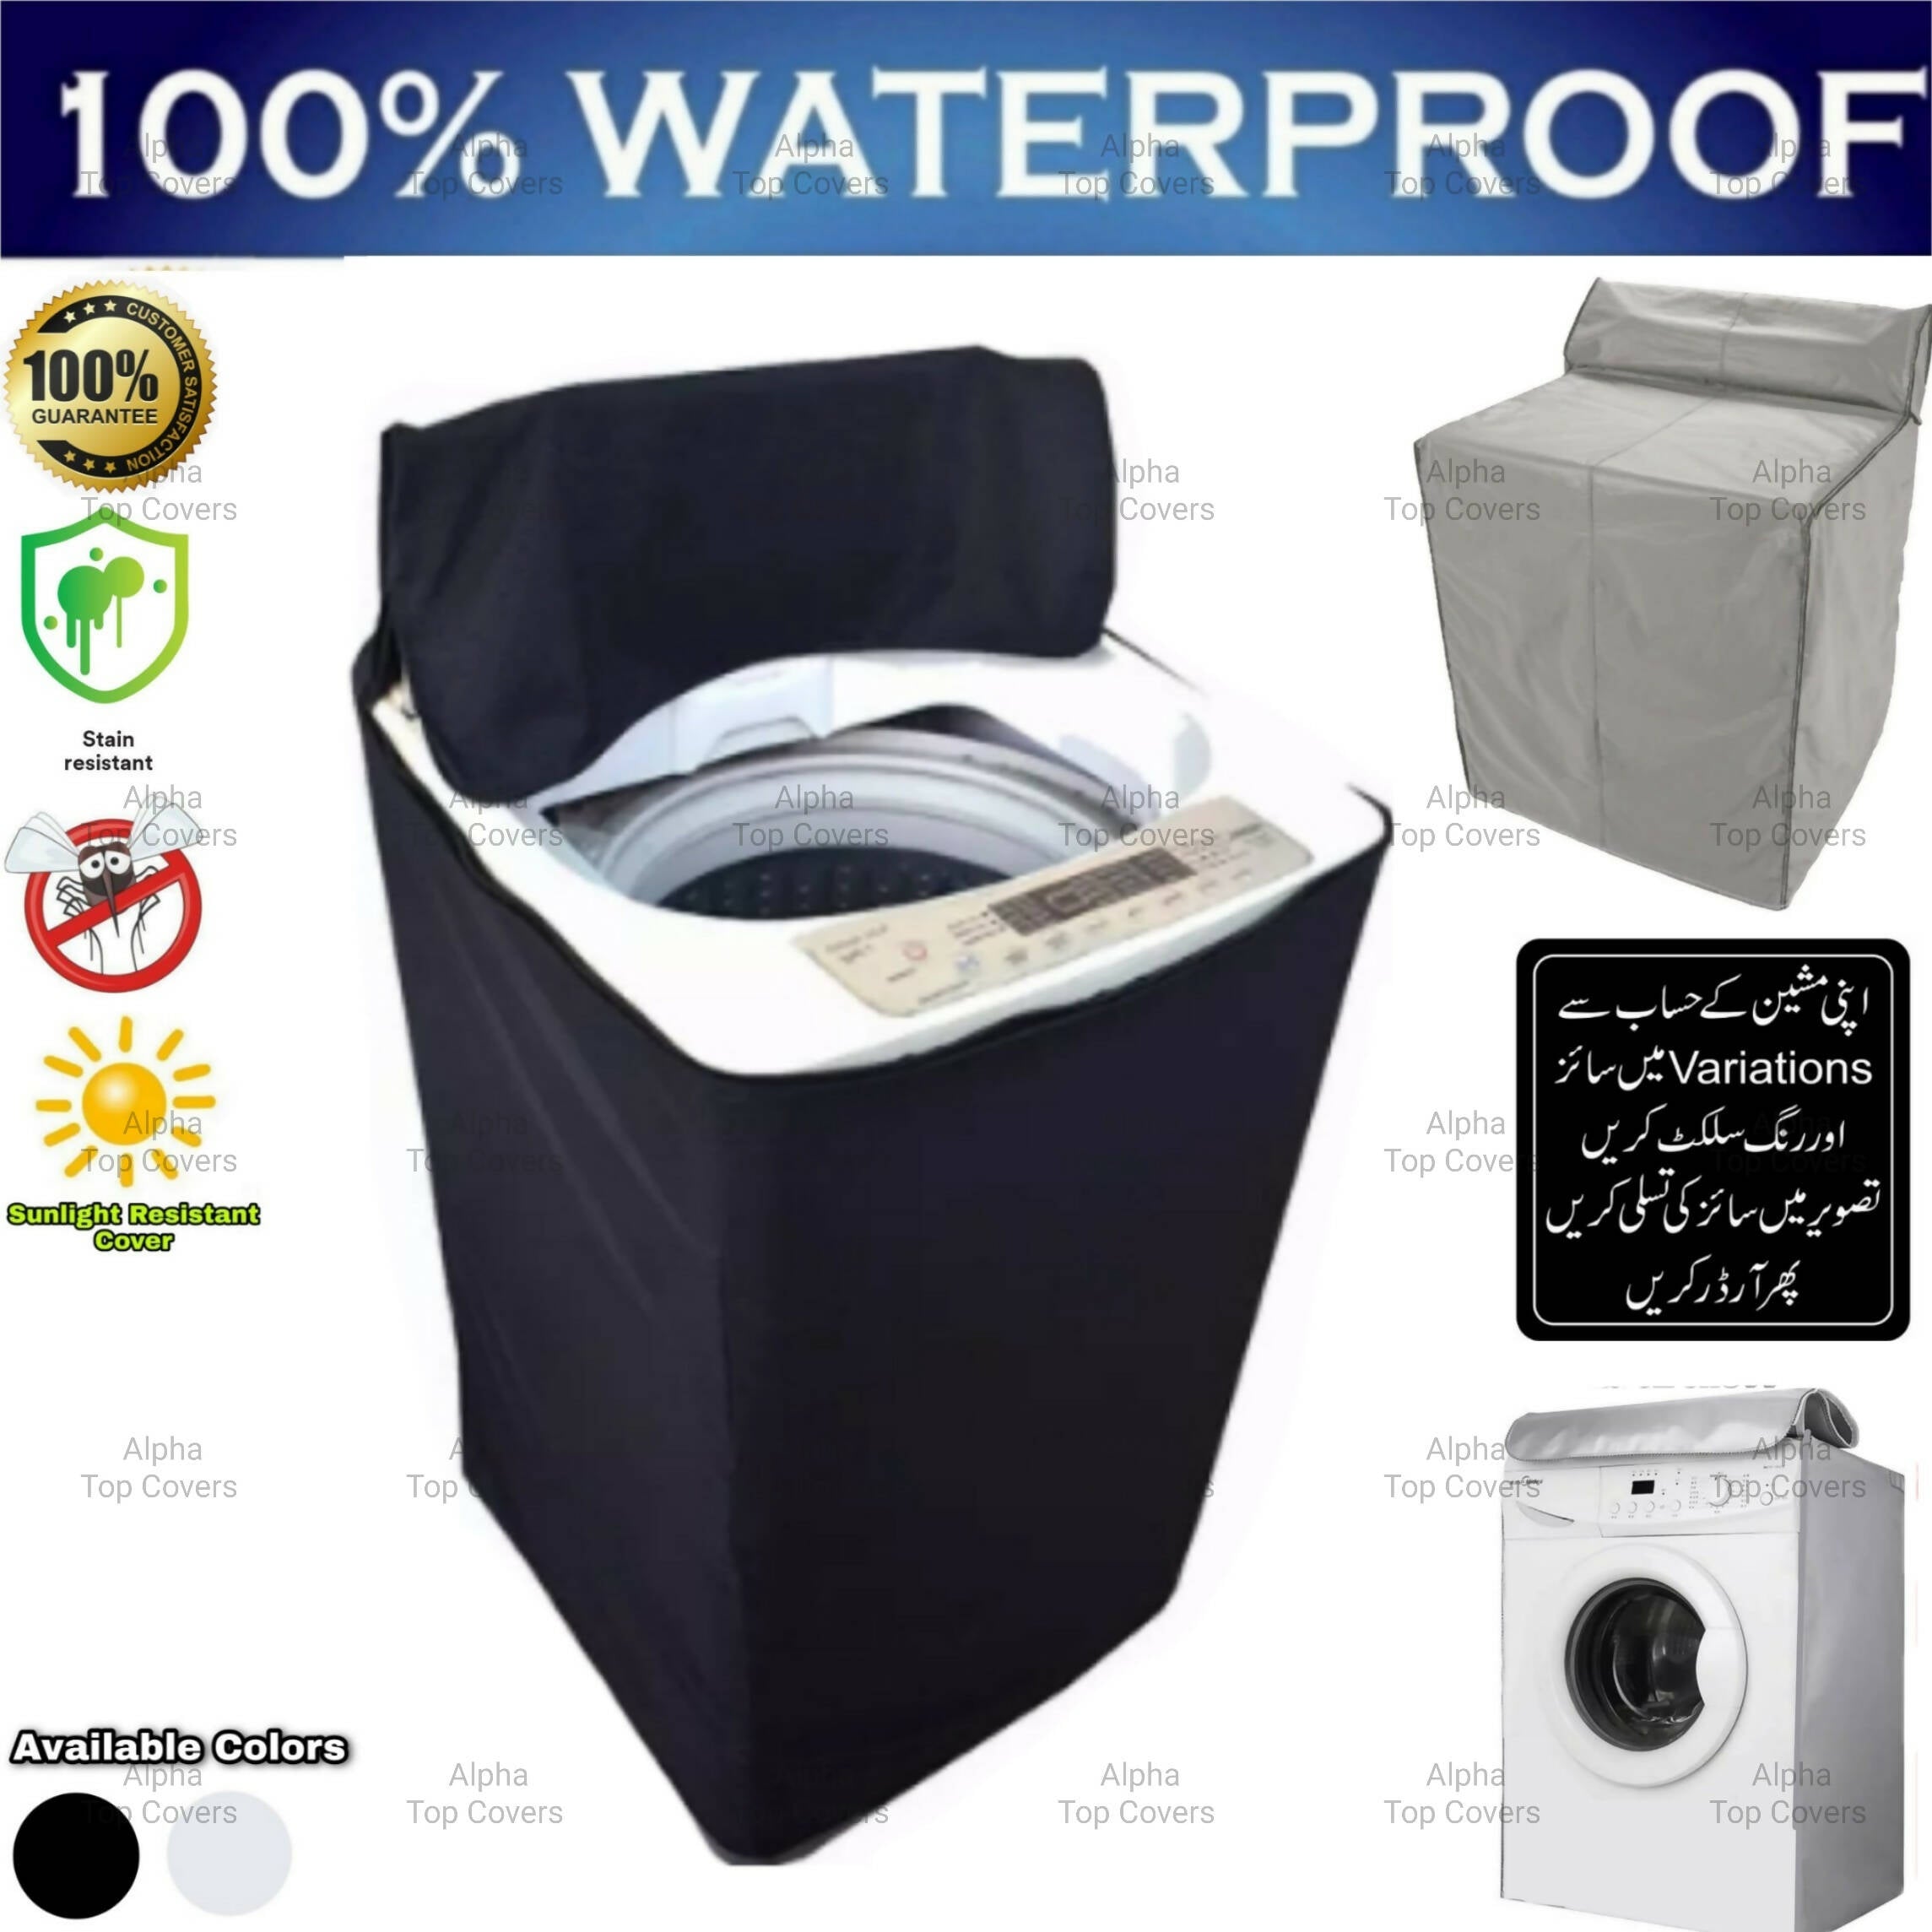 Alpha Washing Machine Cover Available For ALL Models & Sizes